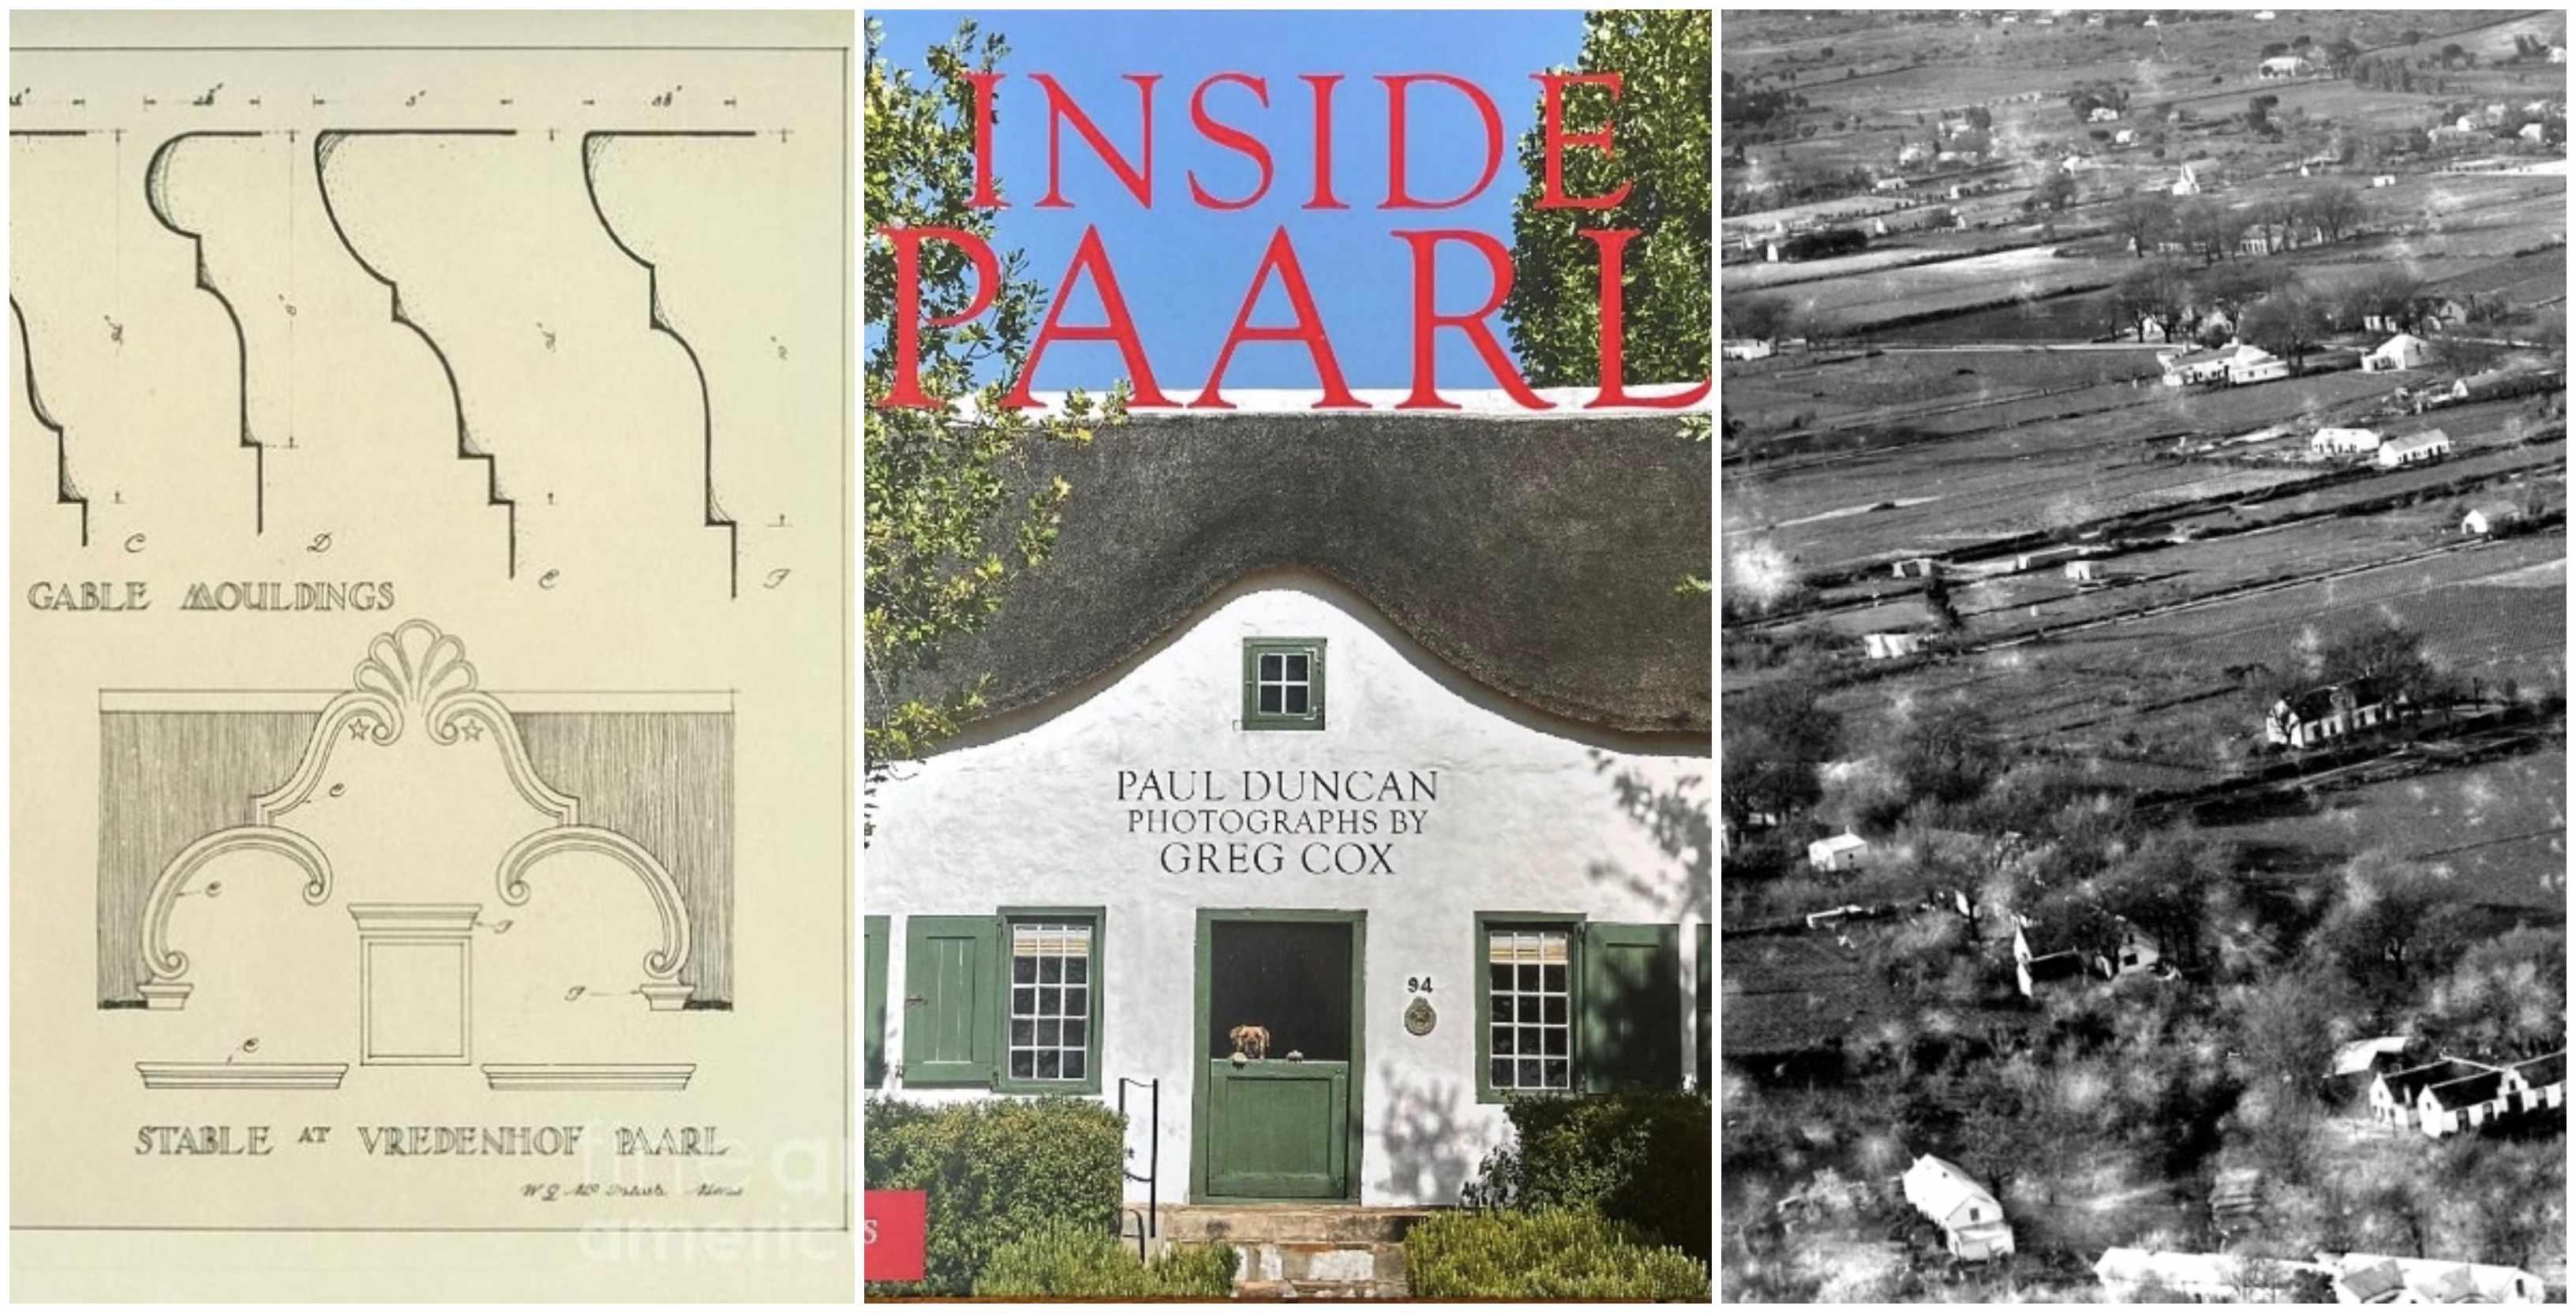 A book that celebrates the glorious heritage of Paarl | The Heritage Portal